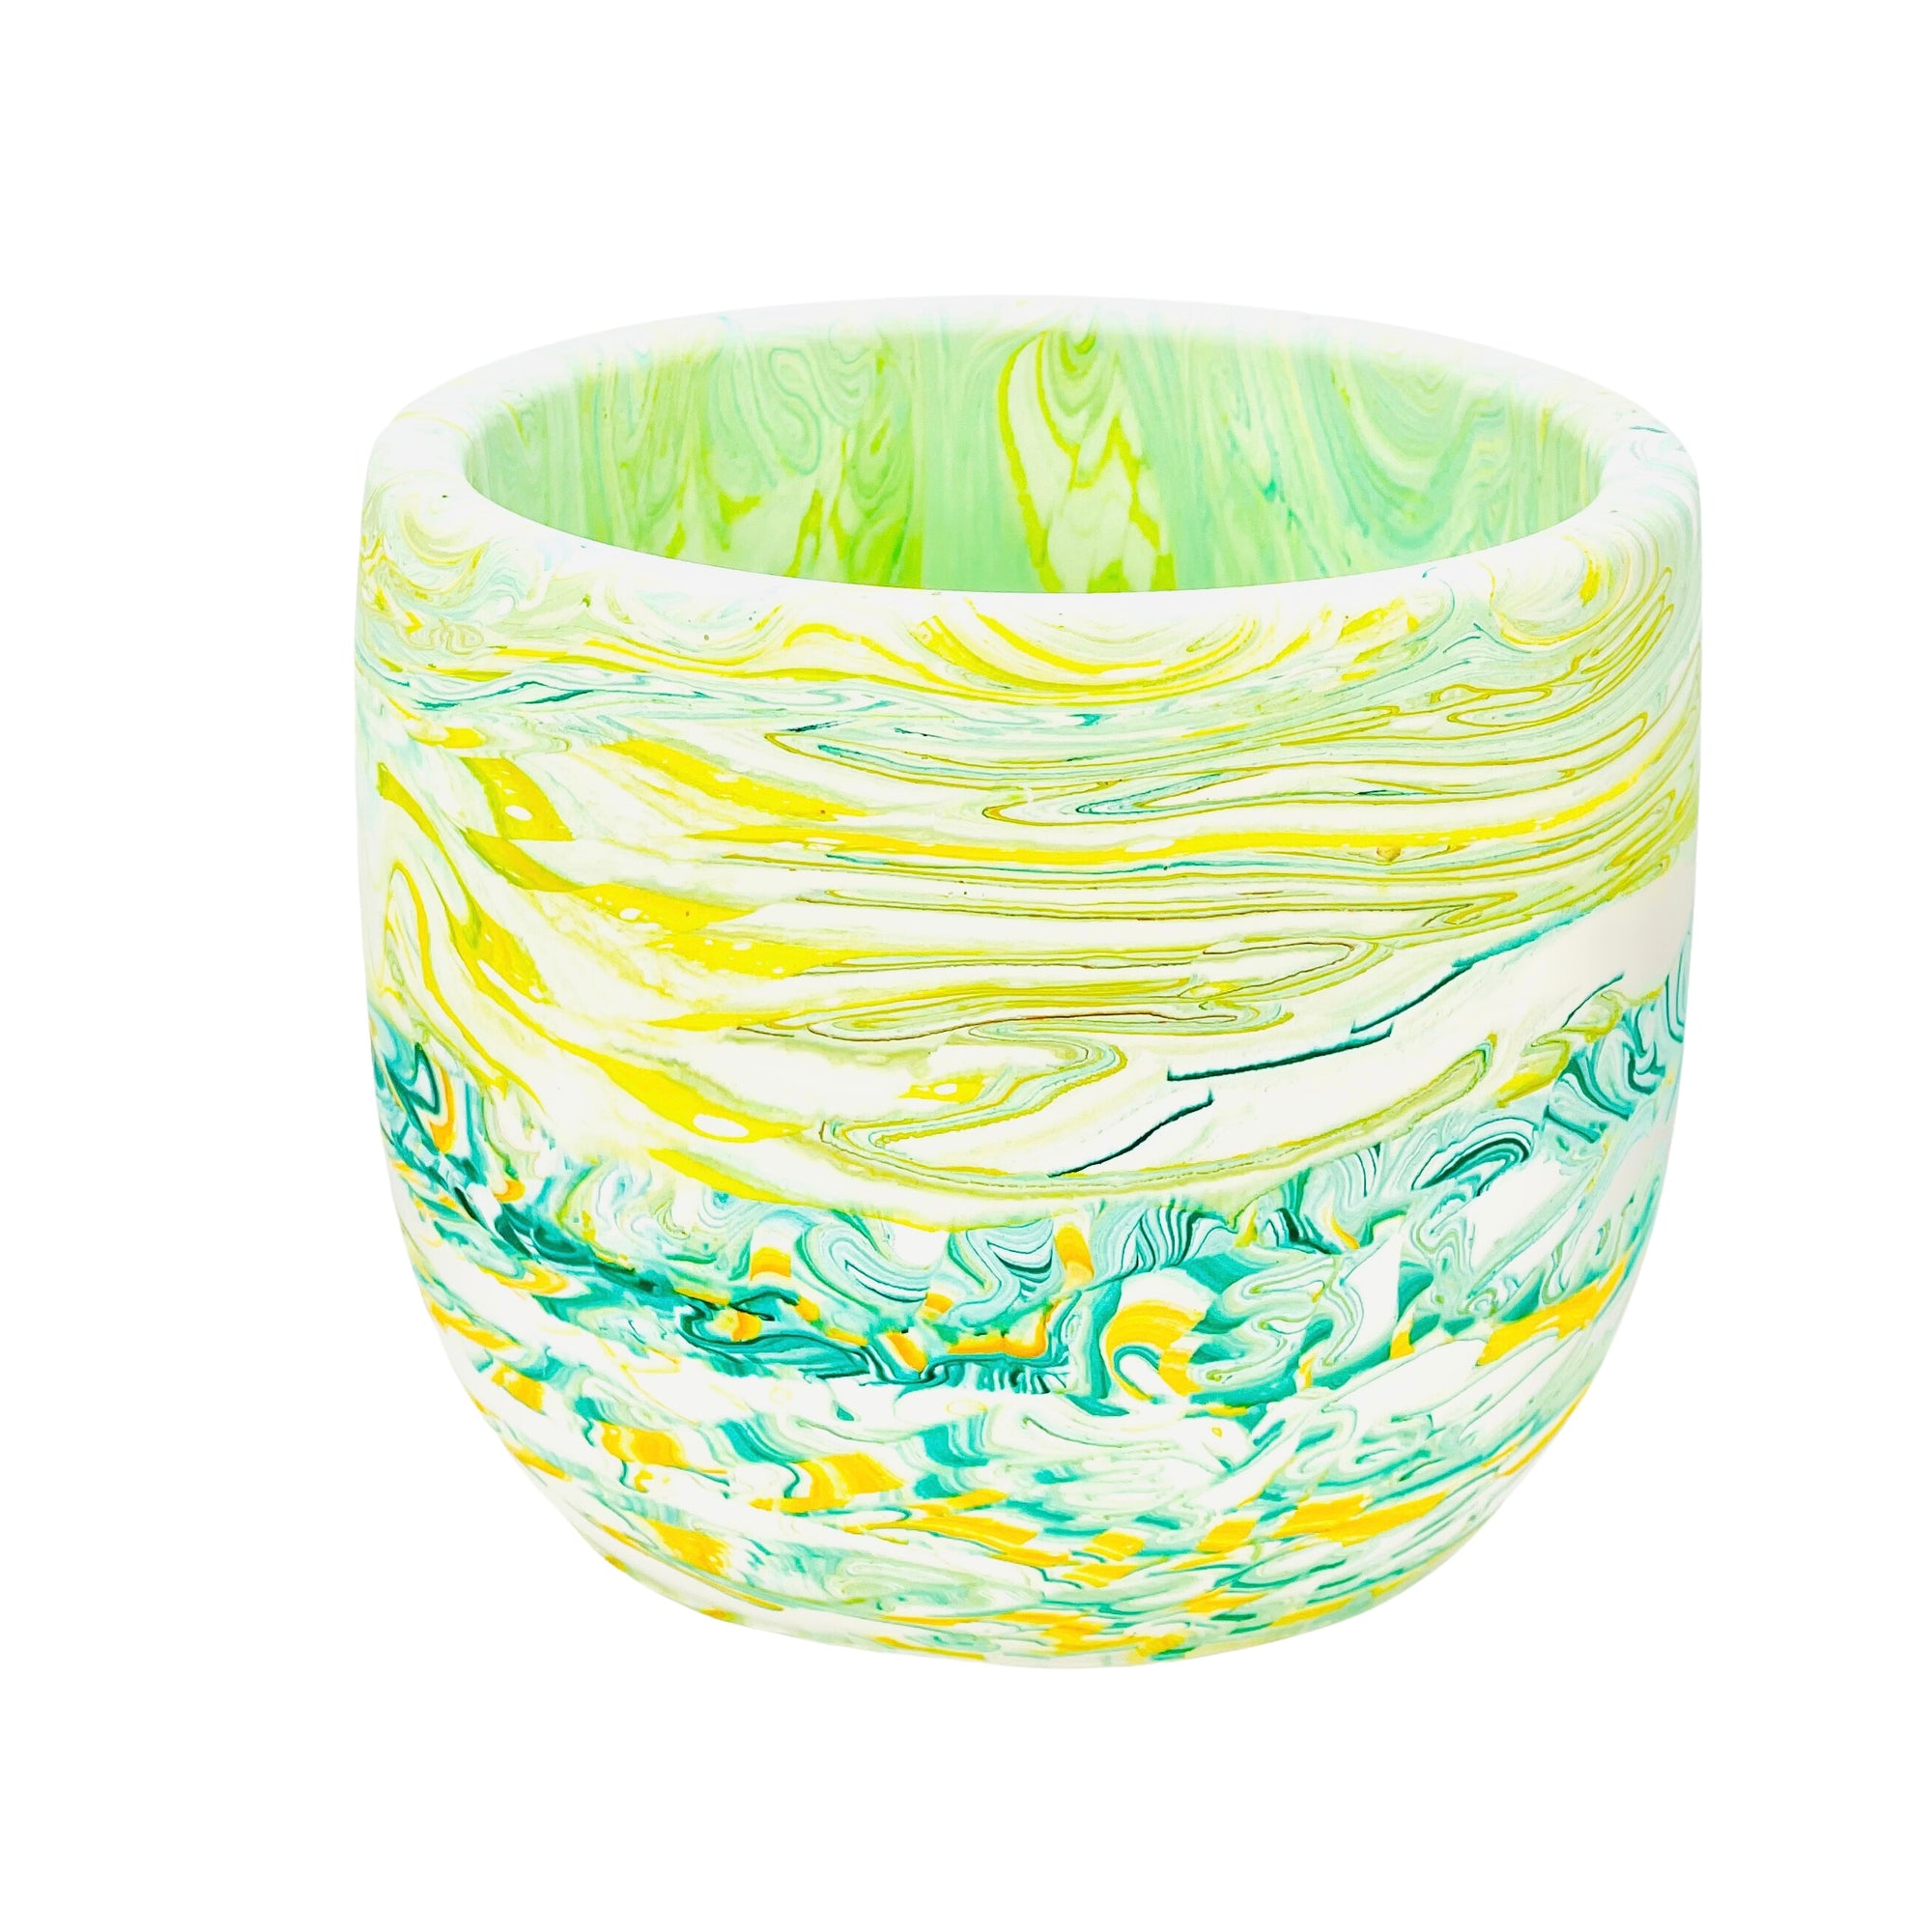 A  soft edged Jesmonite flower pot measuring 12.8cm in diameter,  marbled with swirls of green, teal and yellow  pigment.